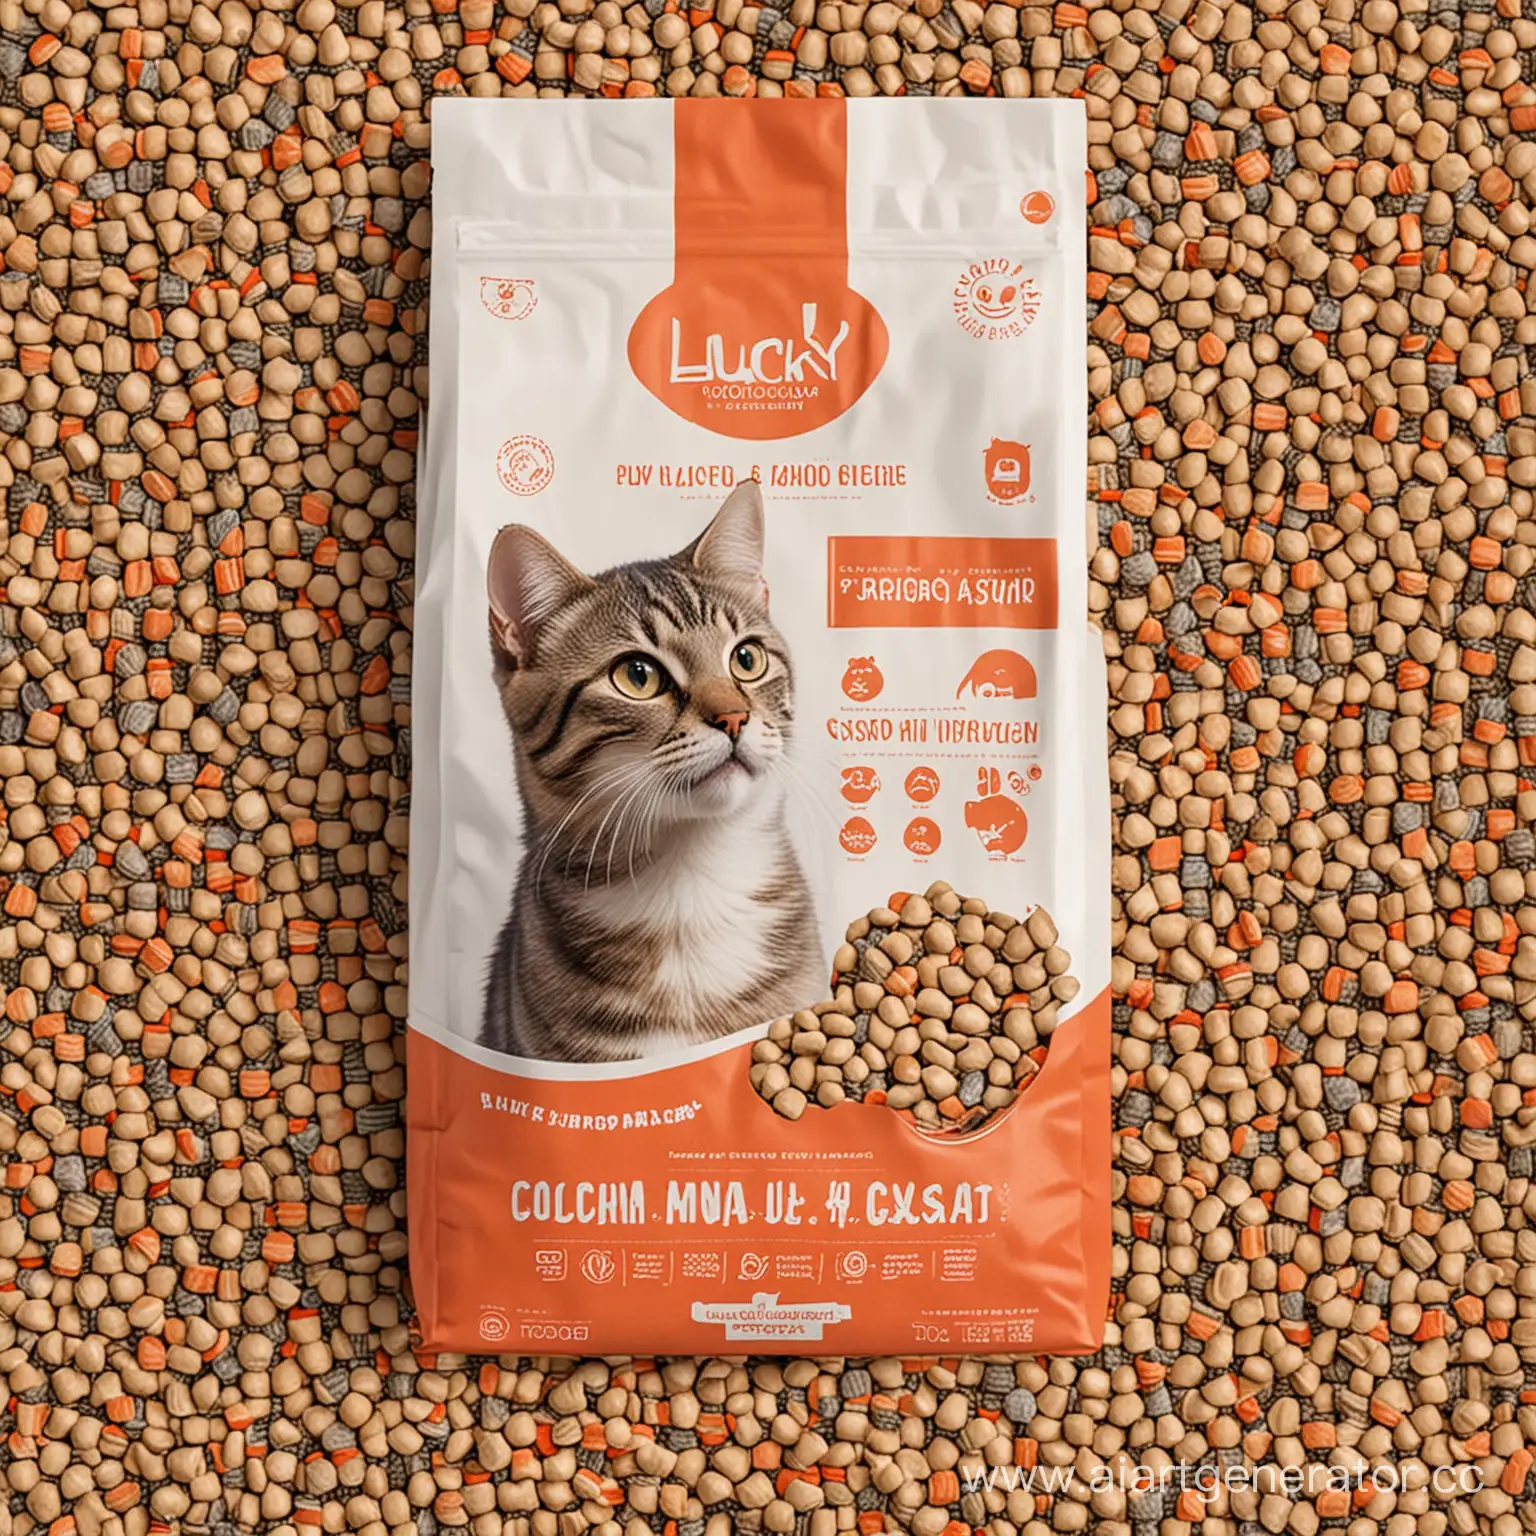 Lucky-Dry-Duck-Cat-Food-5000g-GMOFree-Flavorful